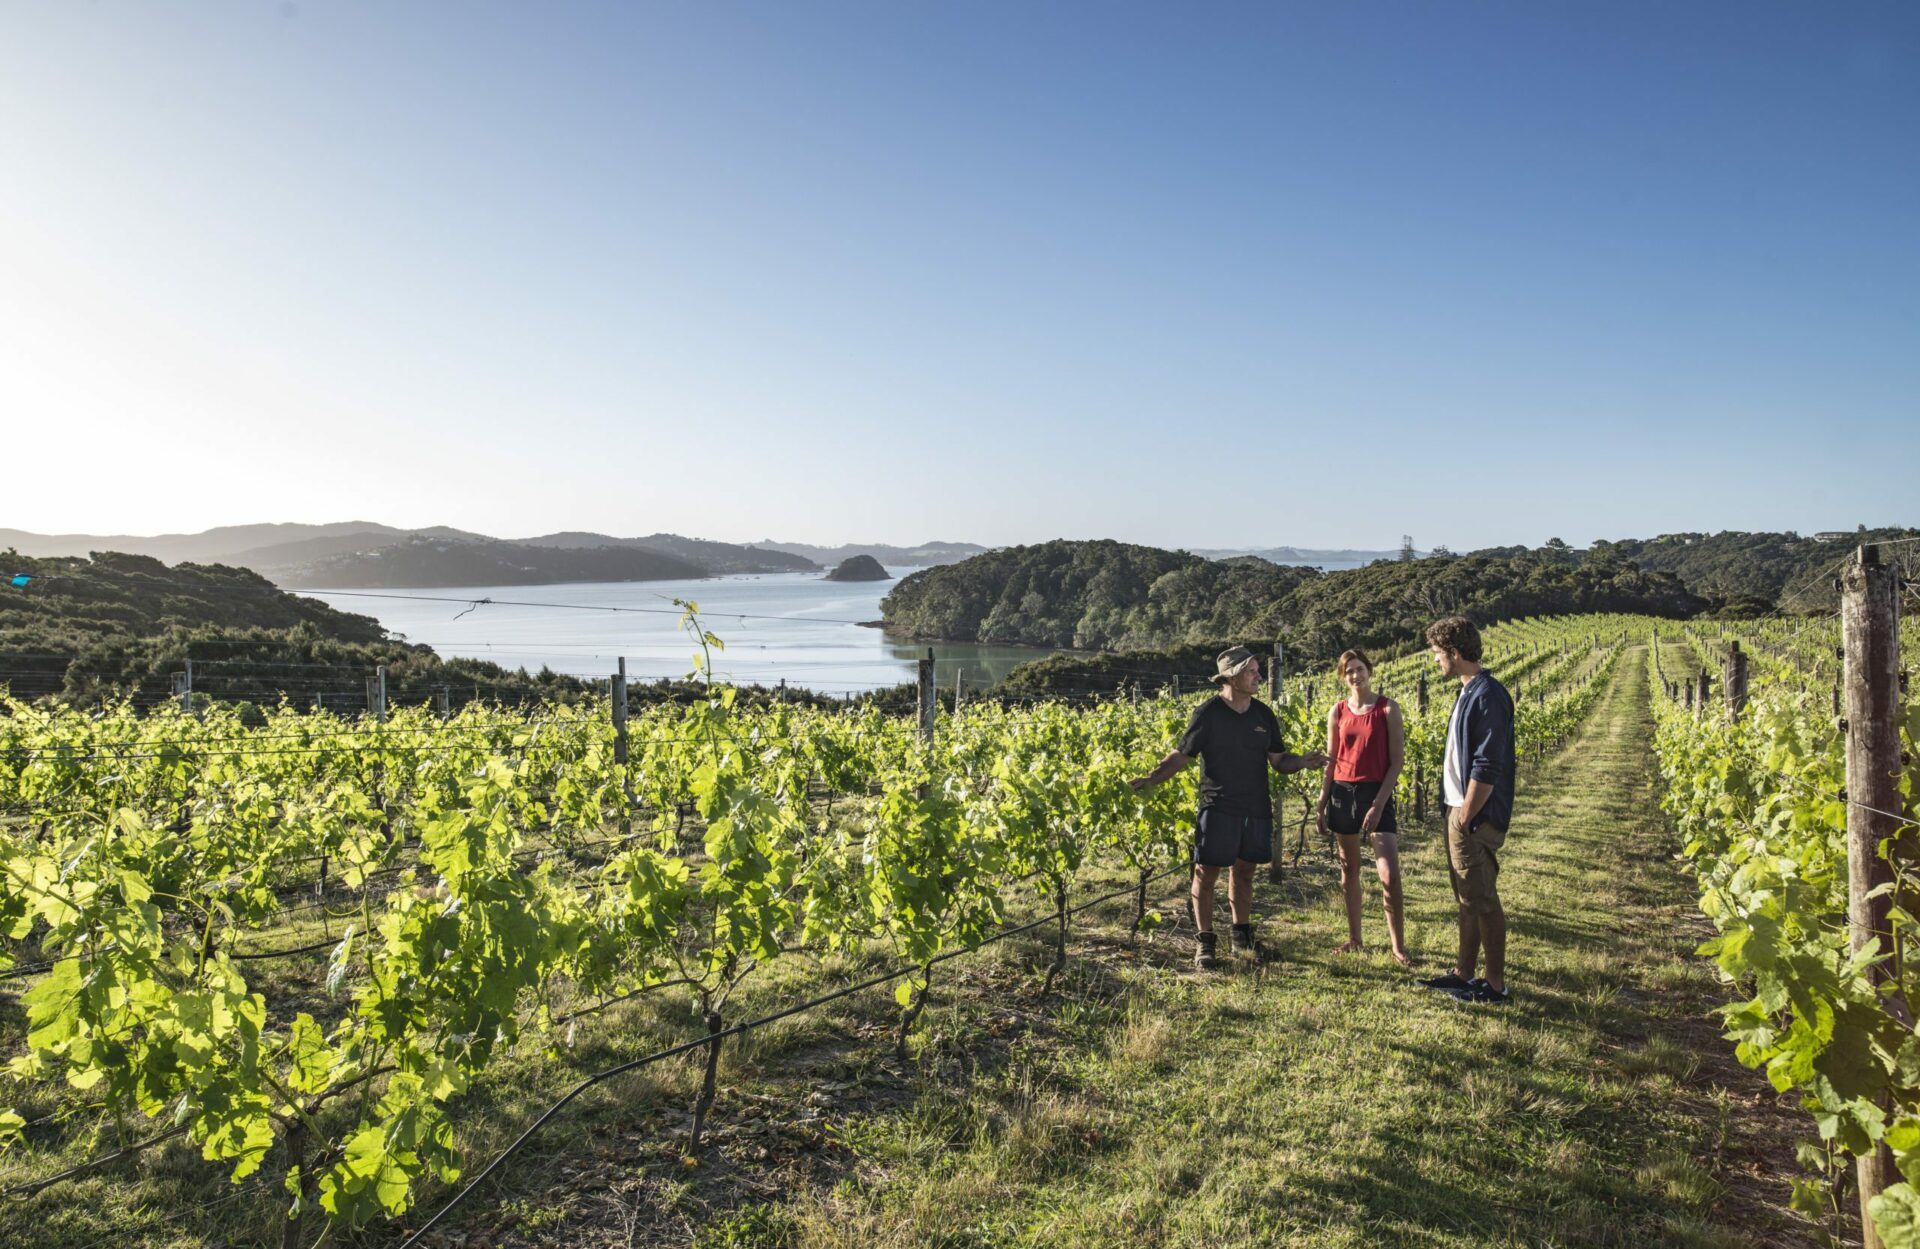 Walking through a vineyard in the Bay of Islands with the ocean in the background.